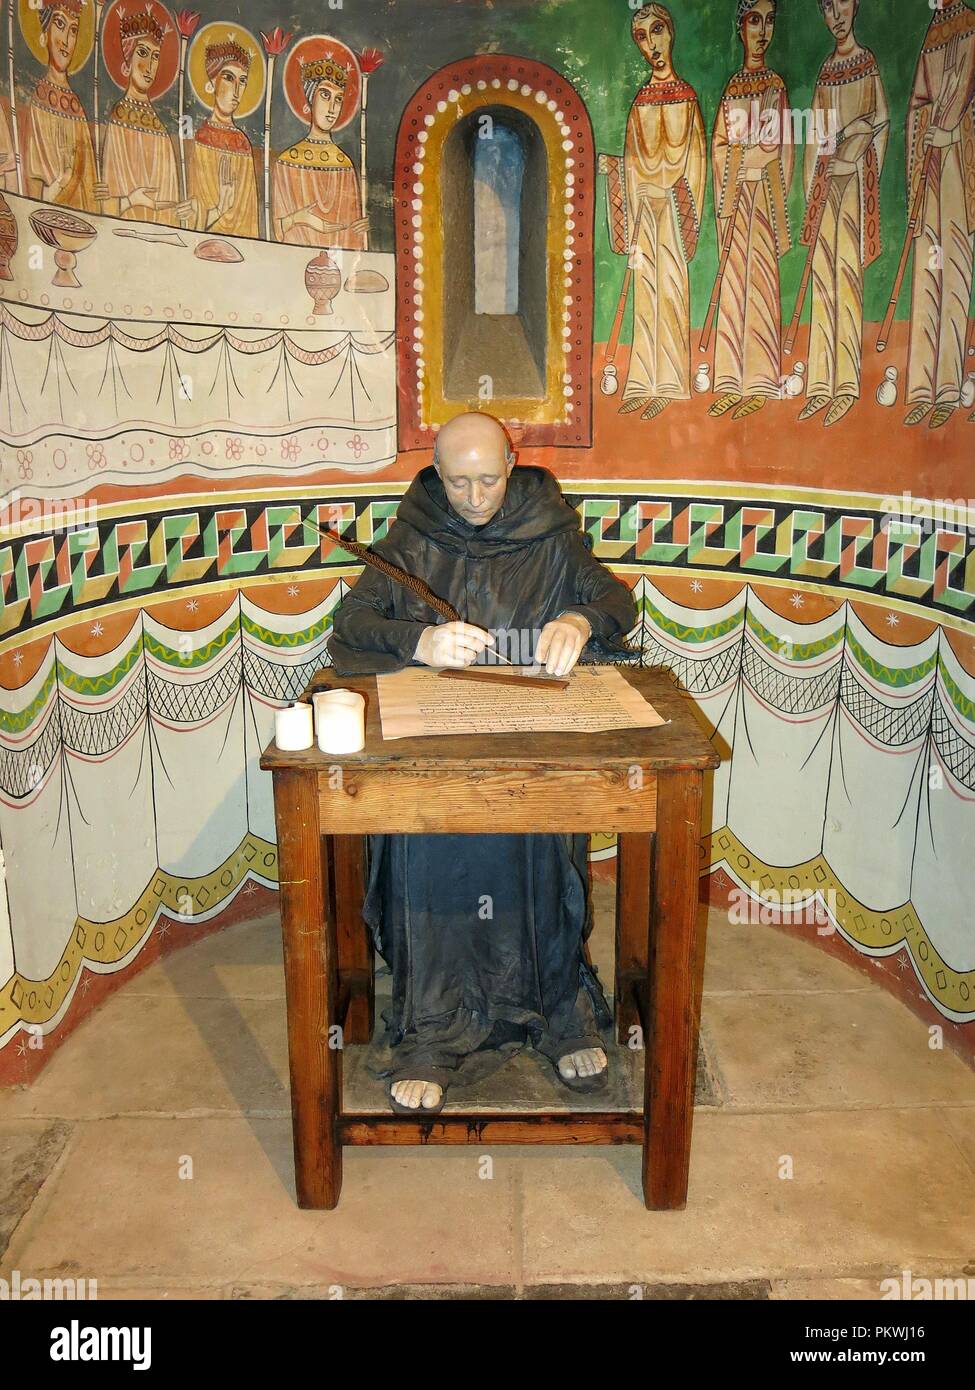 Monk scribe, writing a religious document. Exhibition concerning religion, Montjuic, Barcelona, Spain. Stock Photo